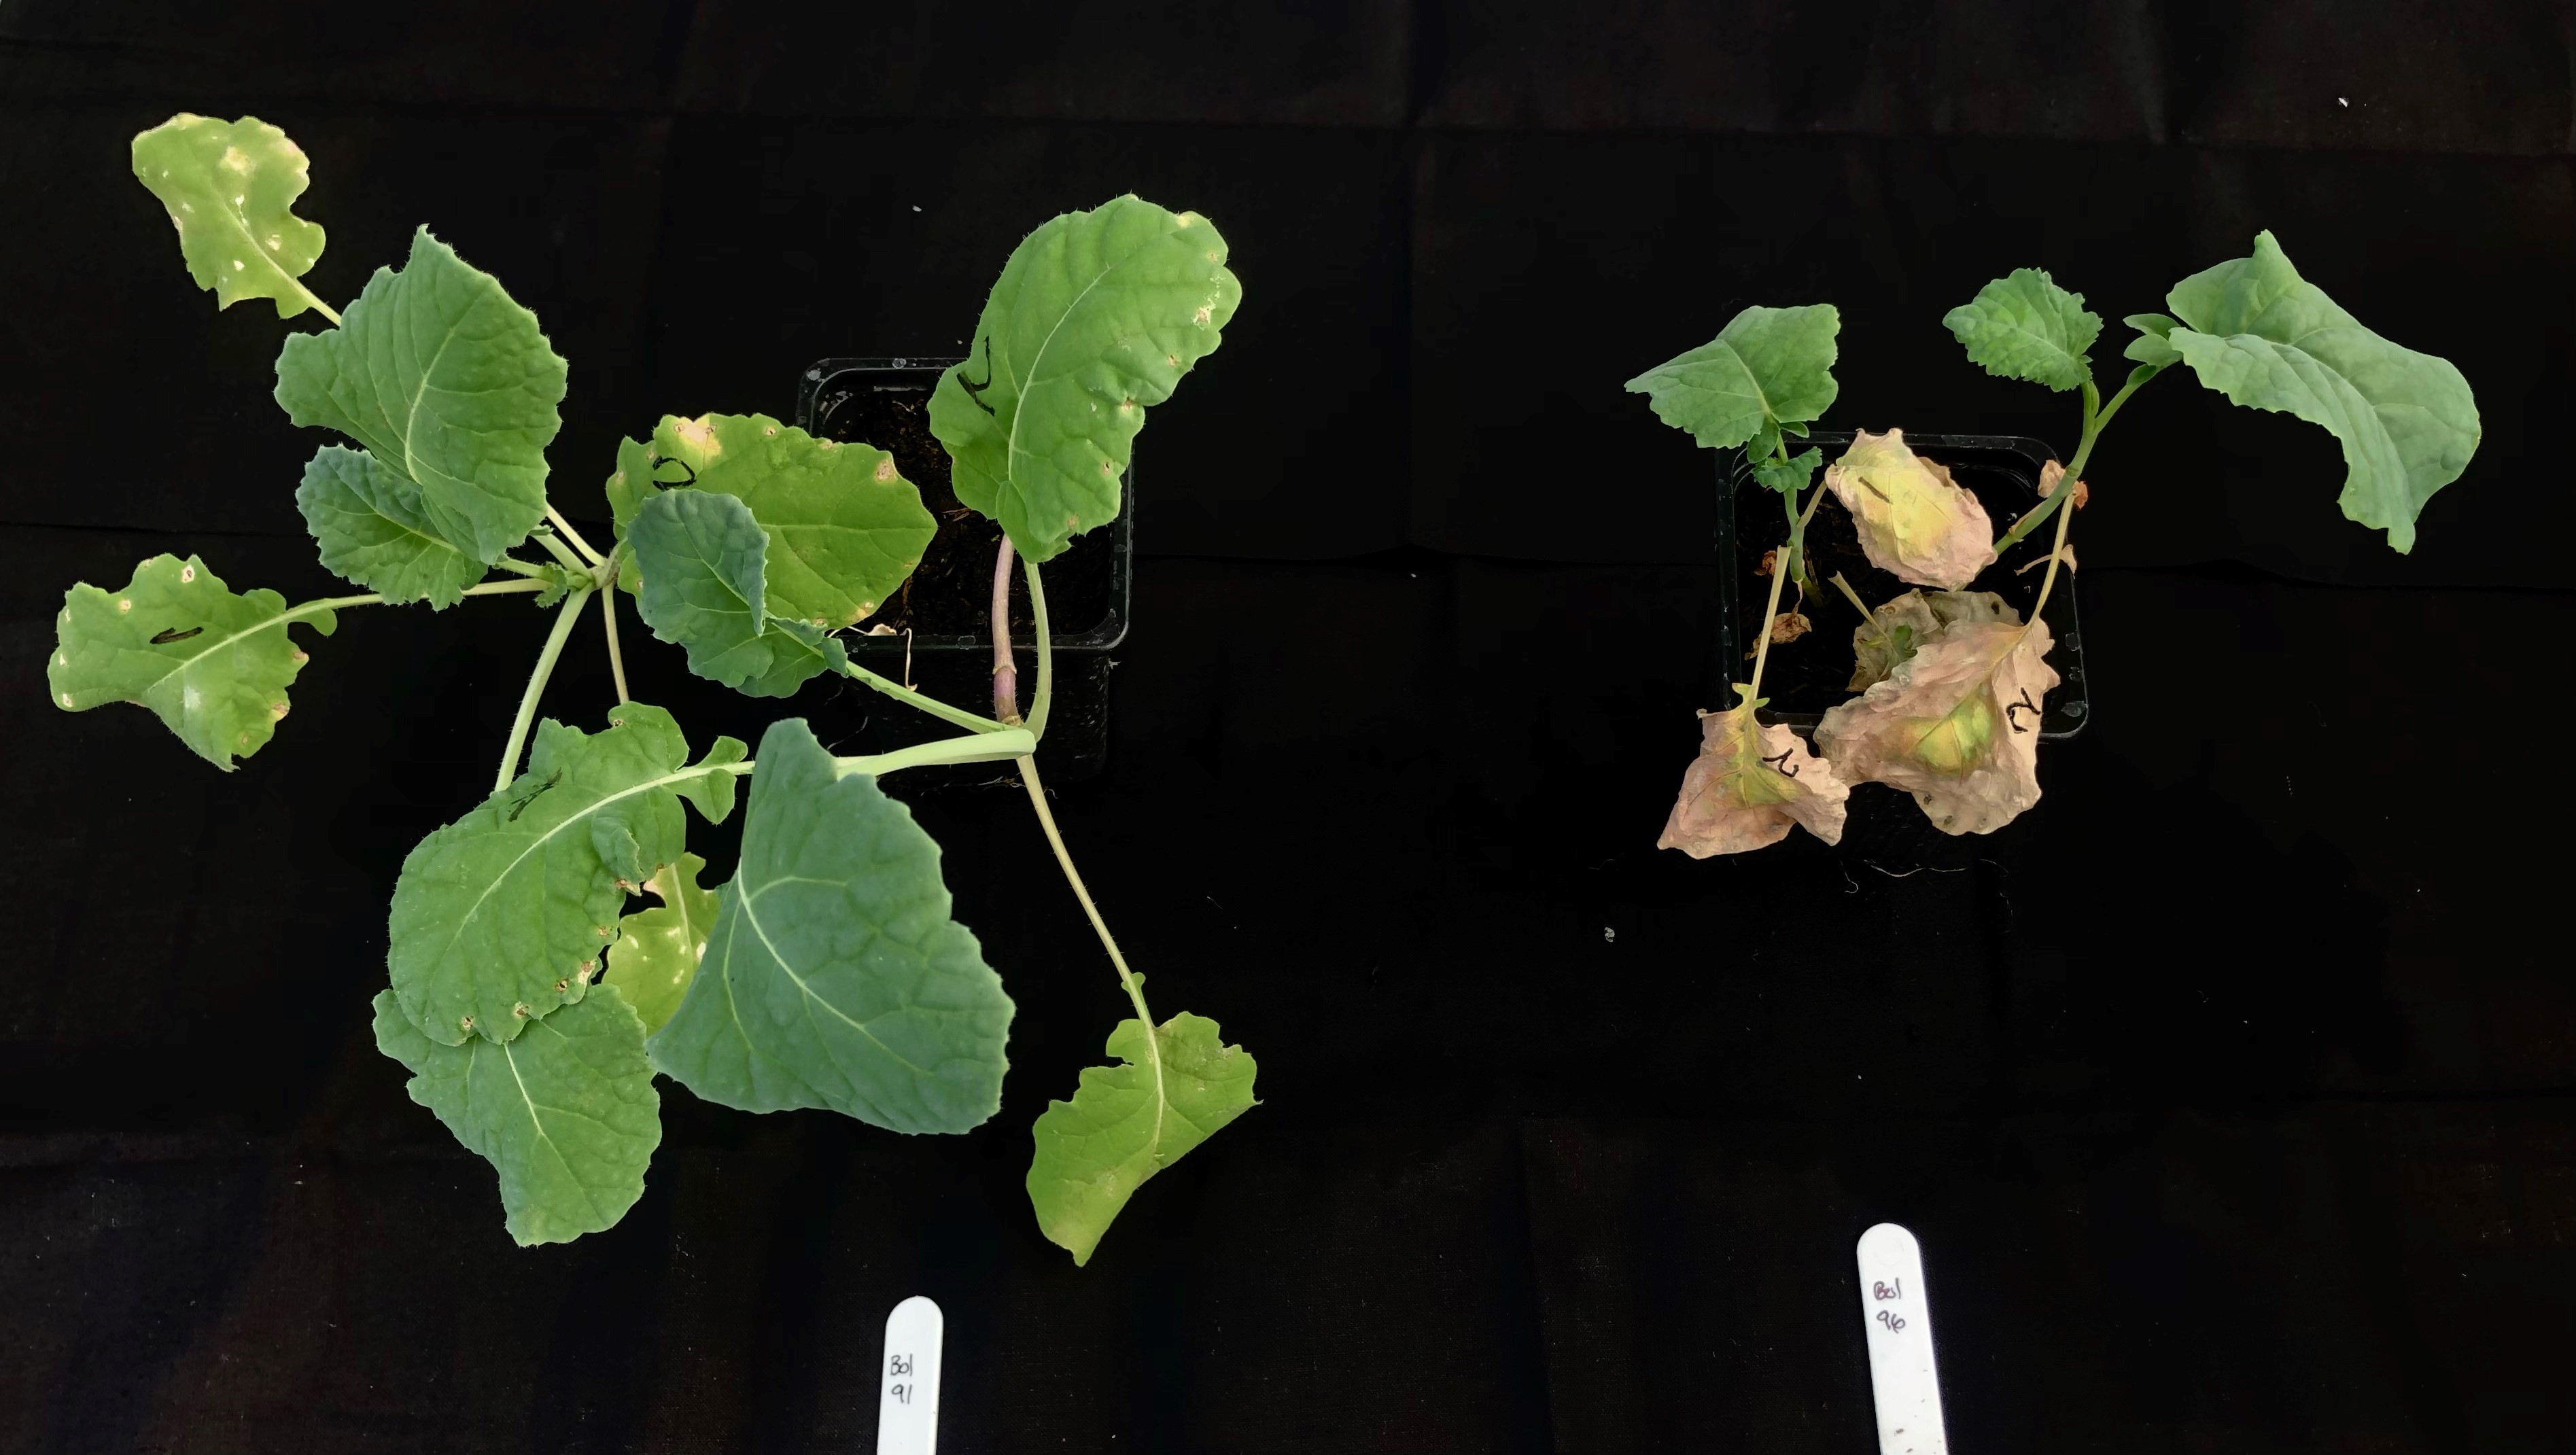 Two brassica plants; on the left a healthy plant and on the right a plant infected with Xanthomonas showing symptoms of stunting and necrosis